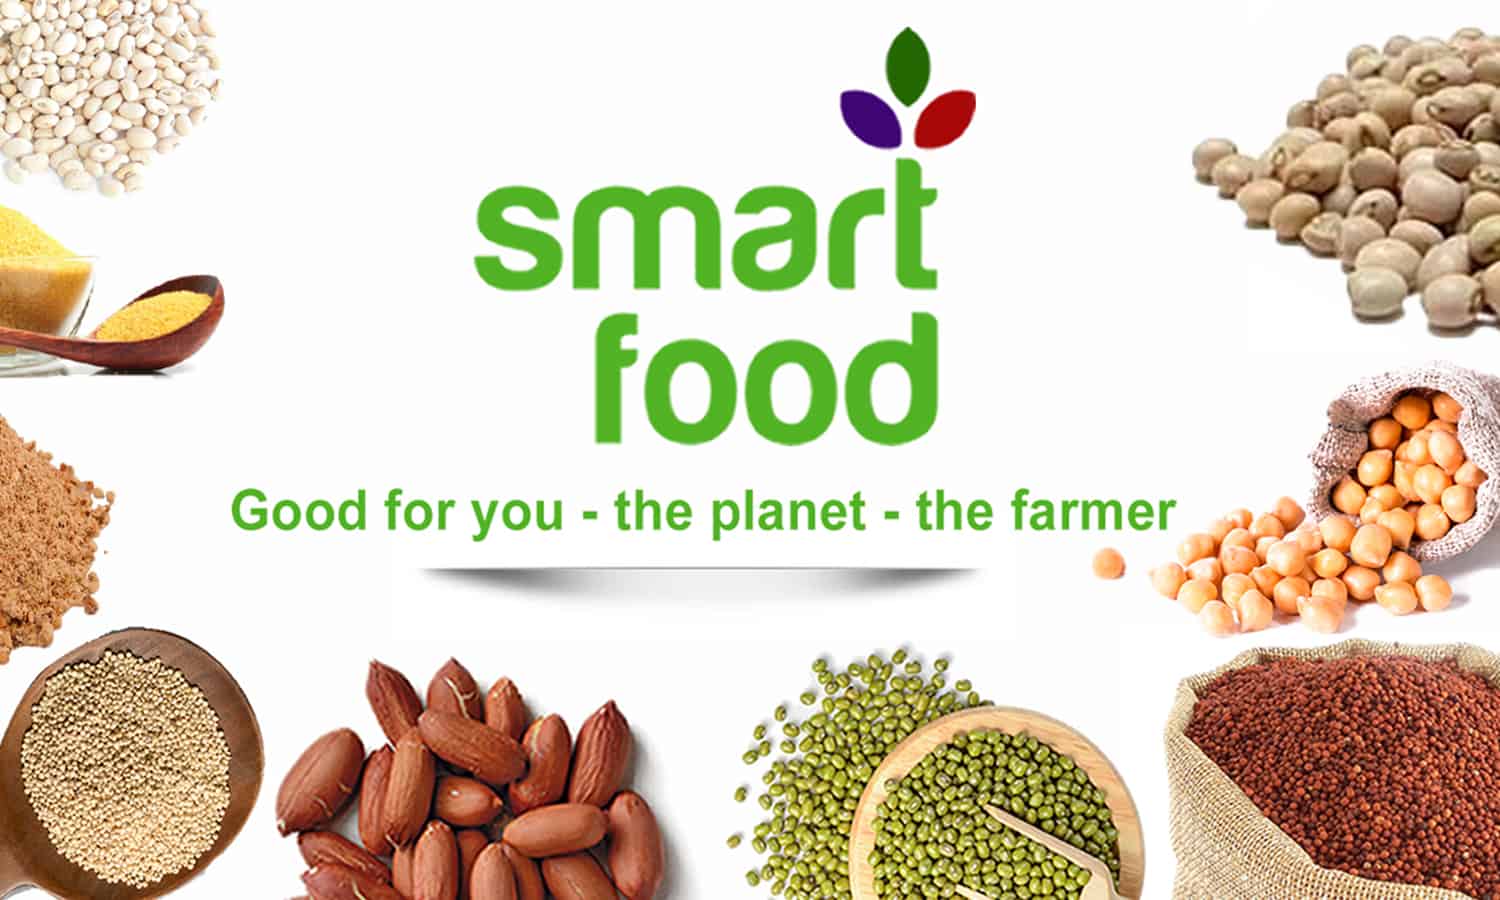 A Q&A with the Smart Food Project’s Joanna Kane-Potaka on the foods she wants the world to eat